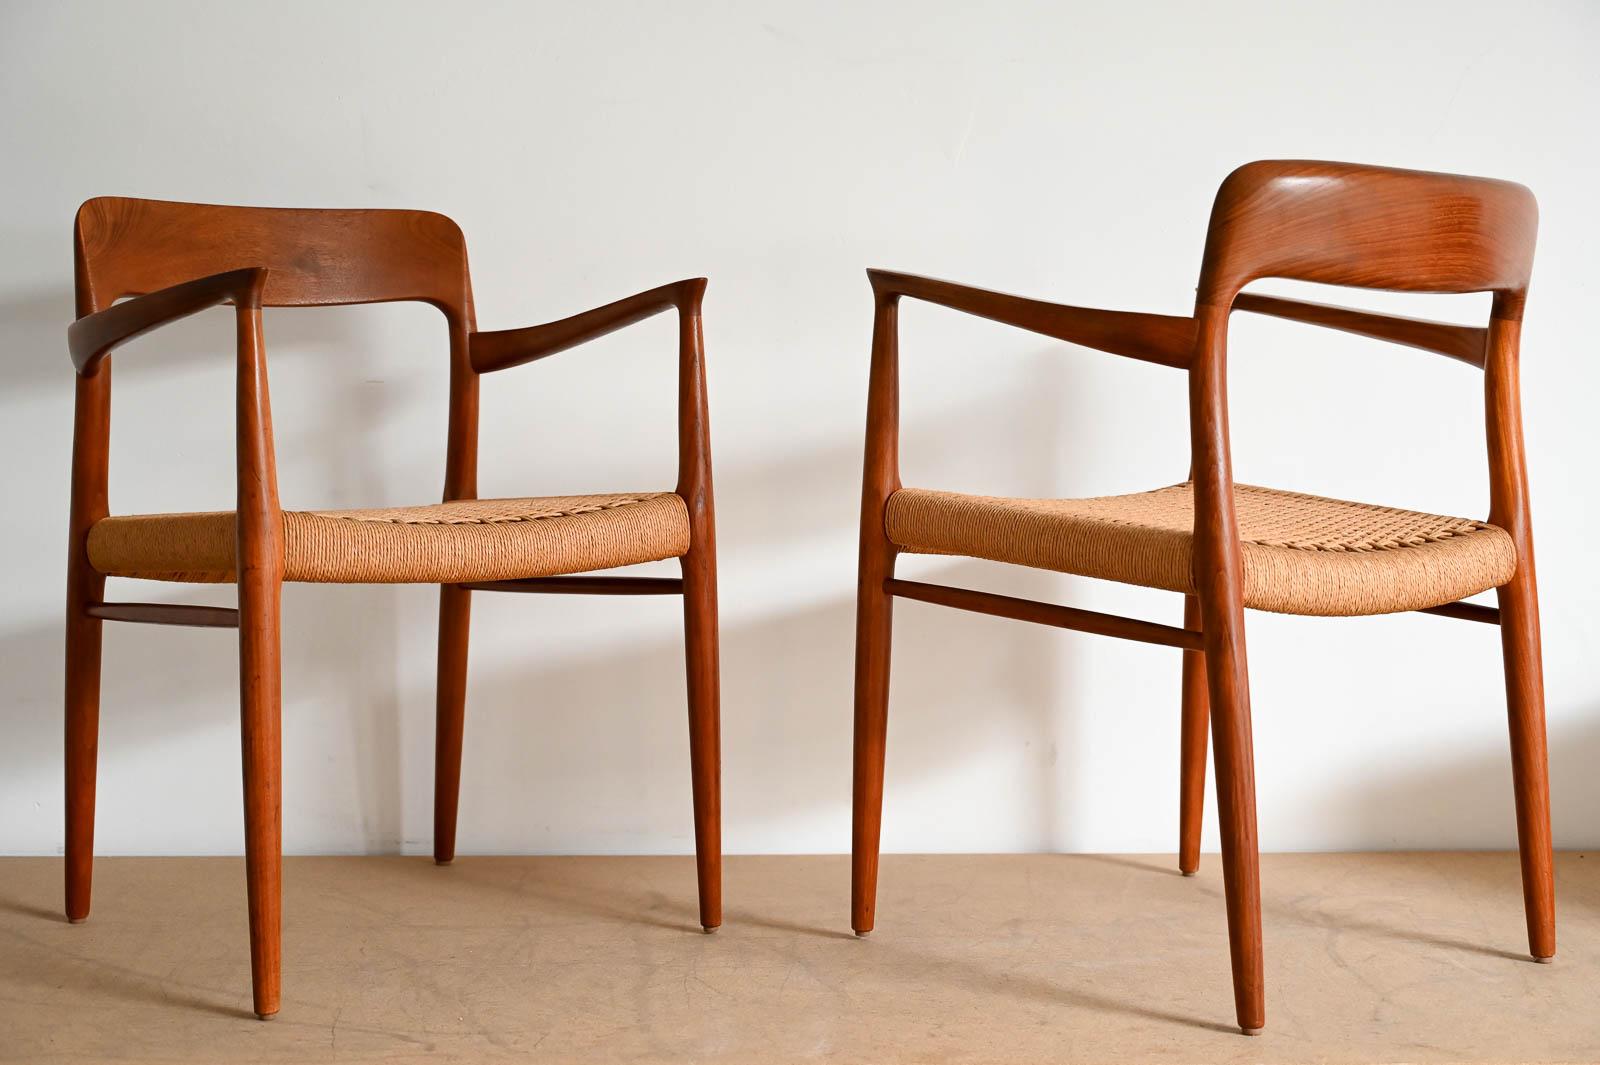 Pair of Neils Moller Model 77 Armchairs, ca. 1960.  Beautiful original pair of Neils Moller armchairs in sculpted teak with paperboard woven seats.  Excellent original condition we rate at a 9/10 with hardly any wear.  This pair is gorgeous and very